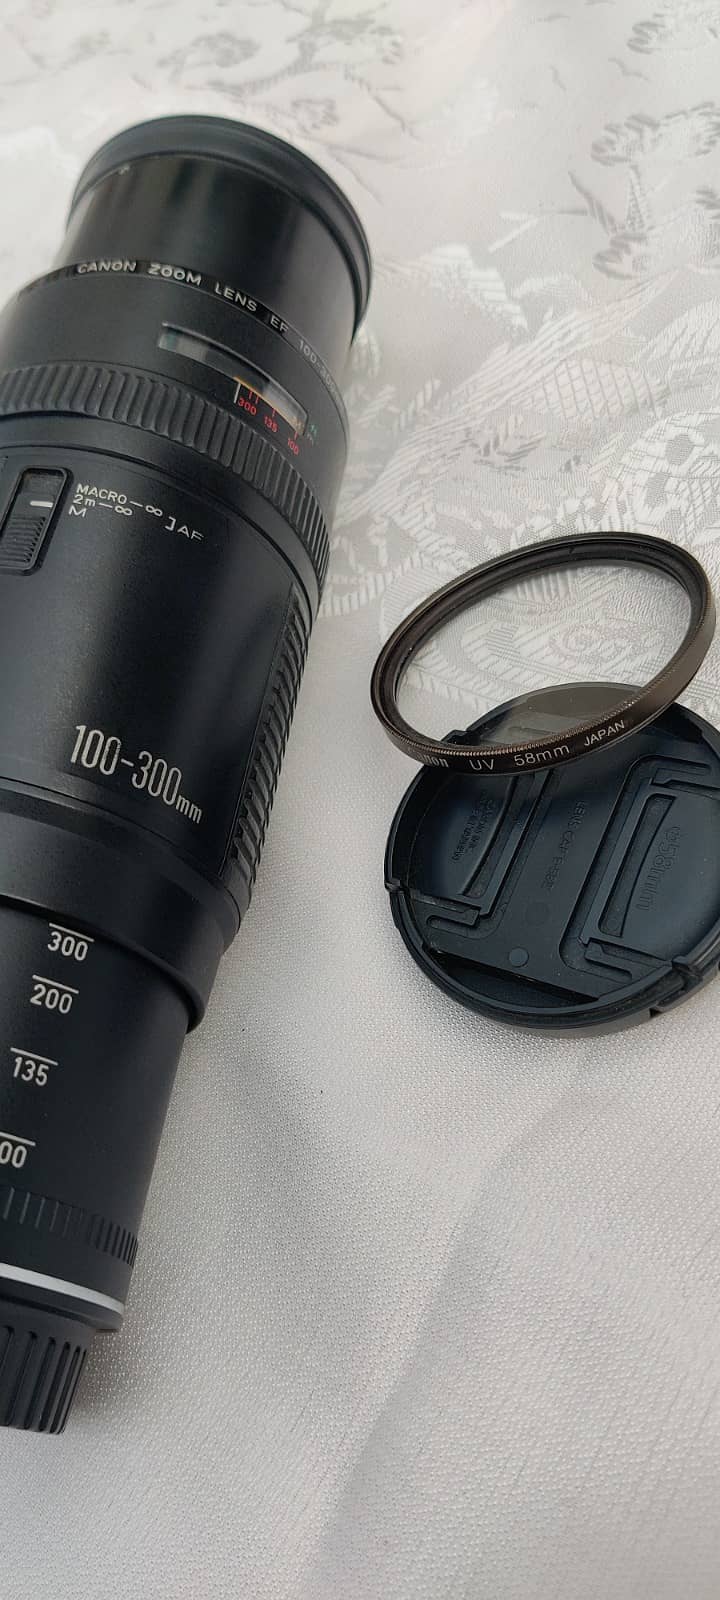 Canon 700D with 2 Lens 100-300mm lens and 50mm 5